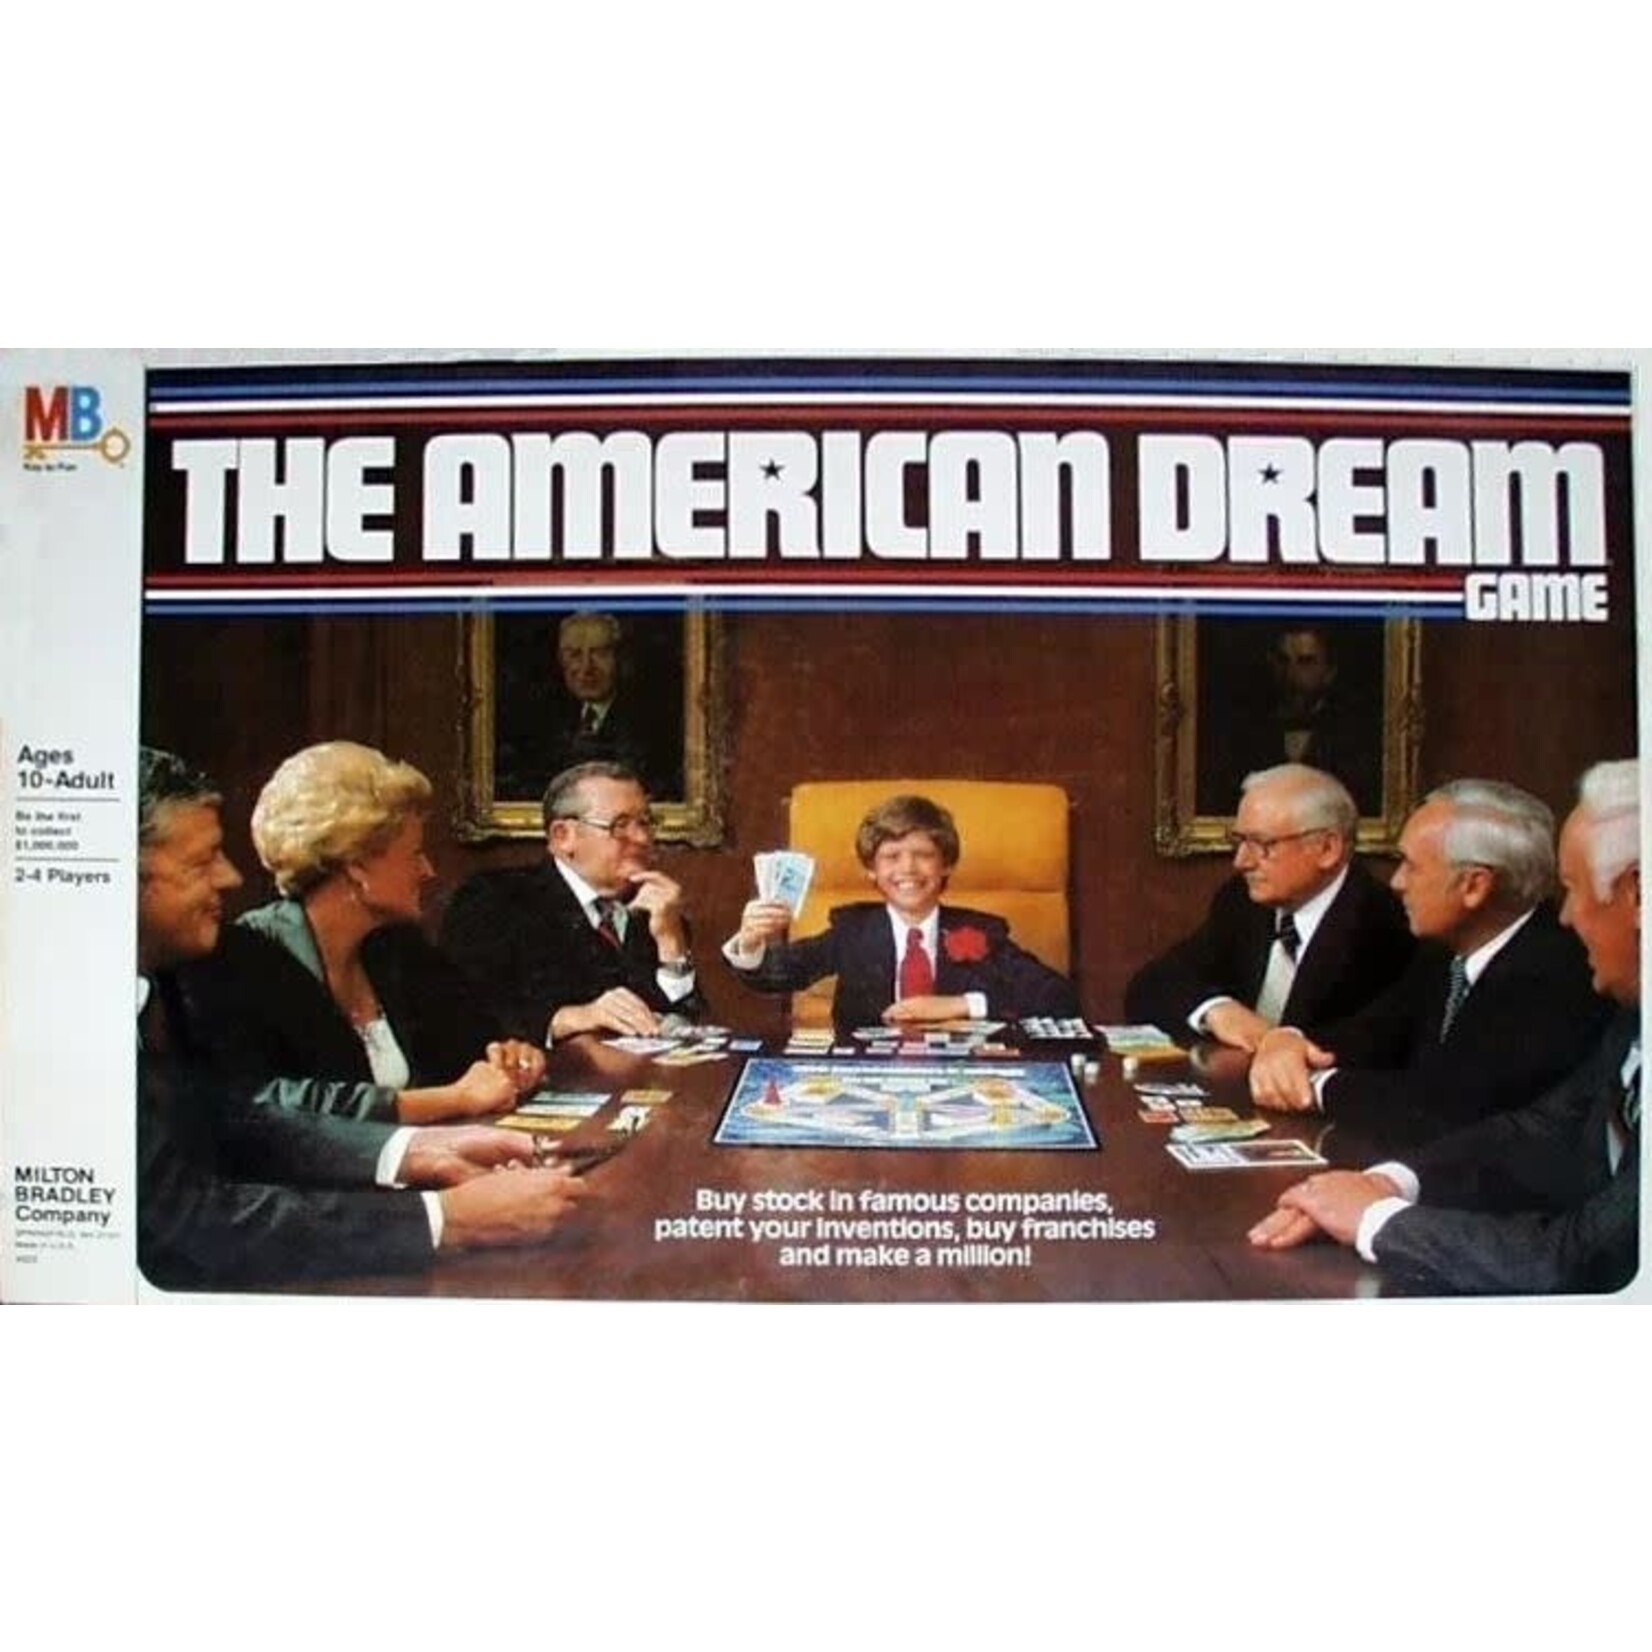 #18409 The American Dream Game: Dragon Cache Used Game